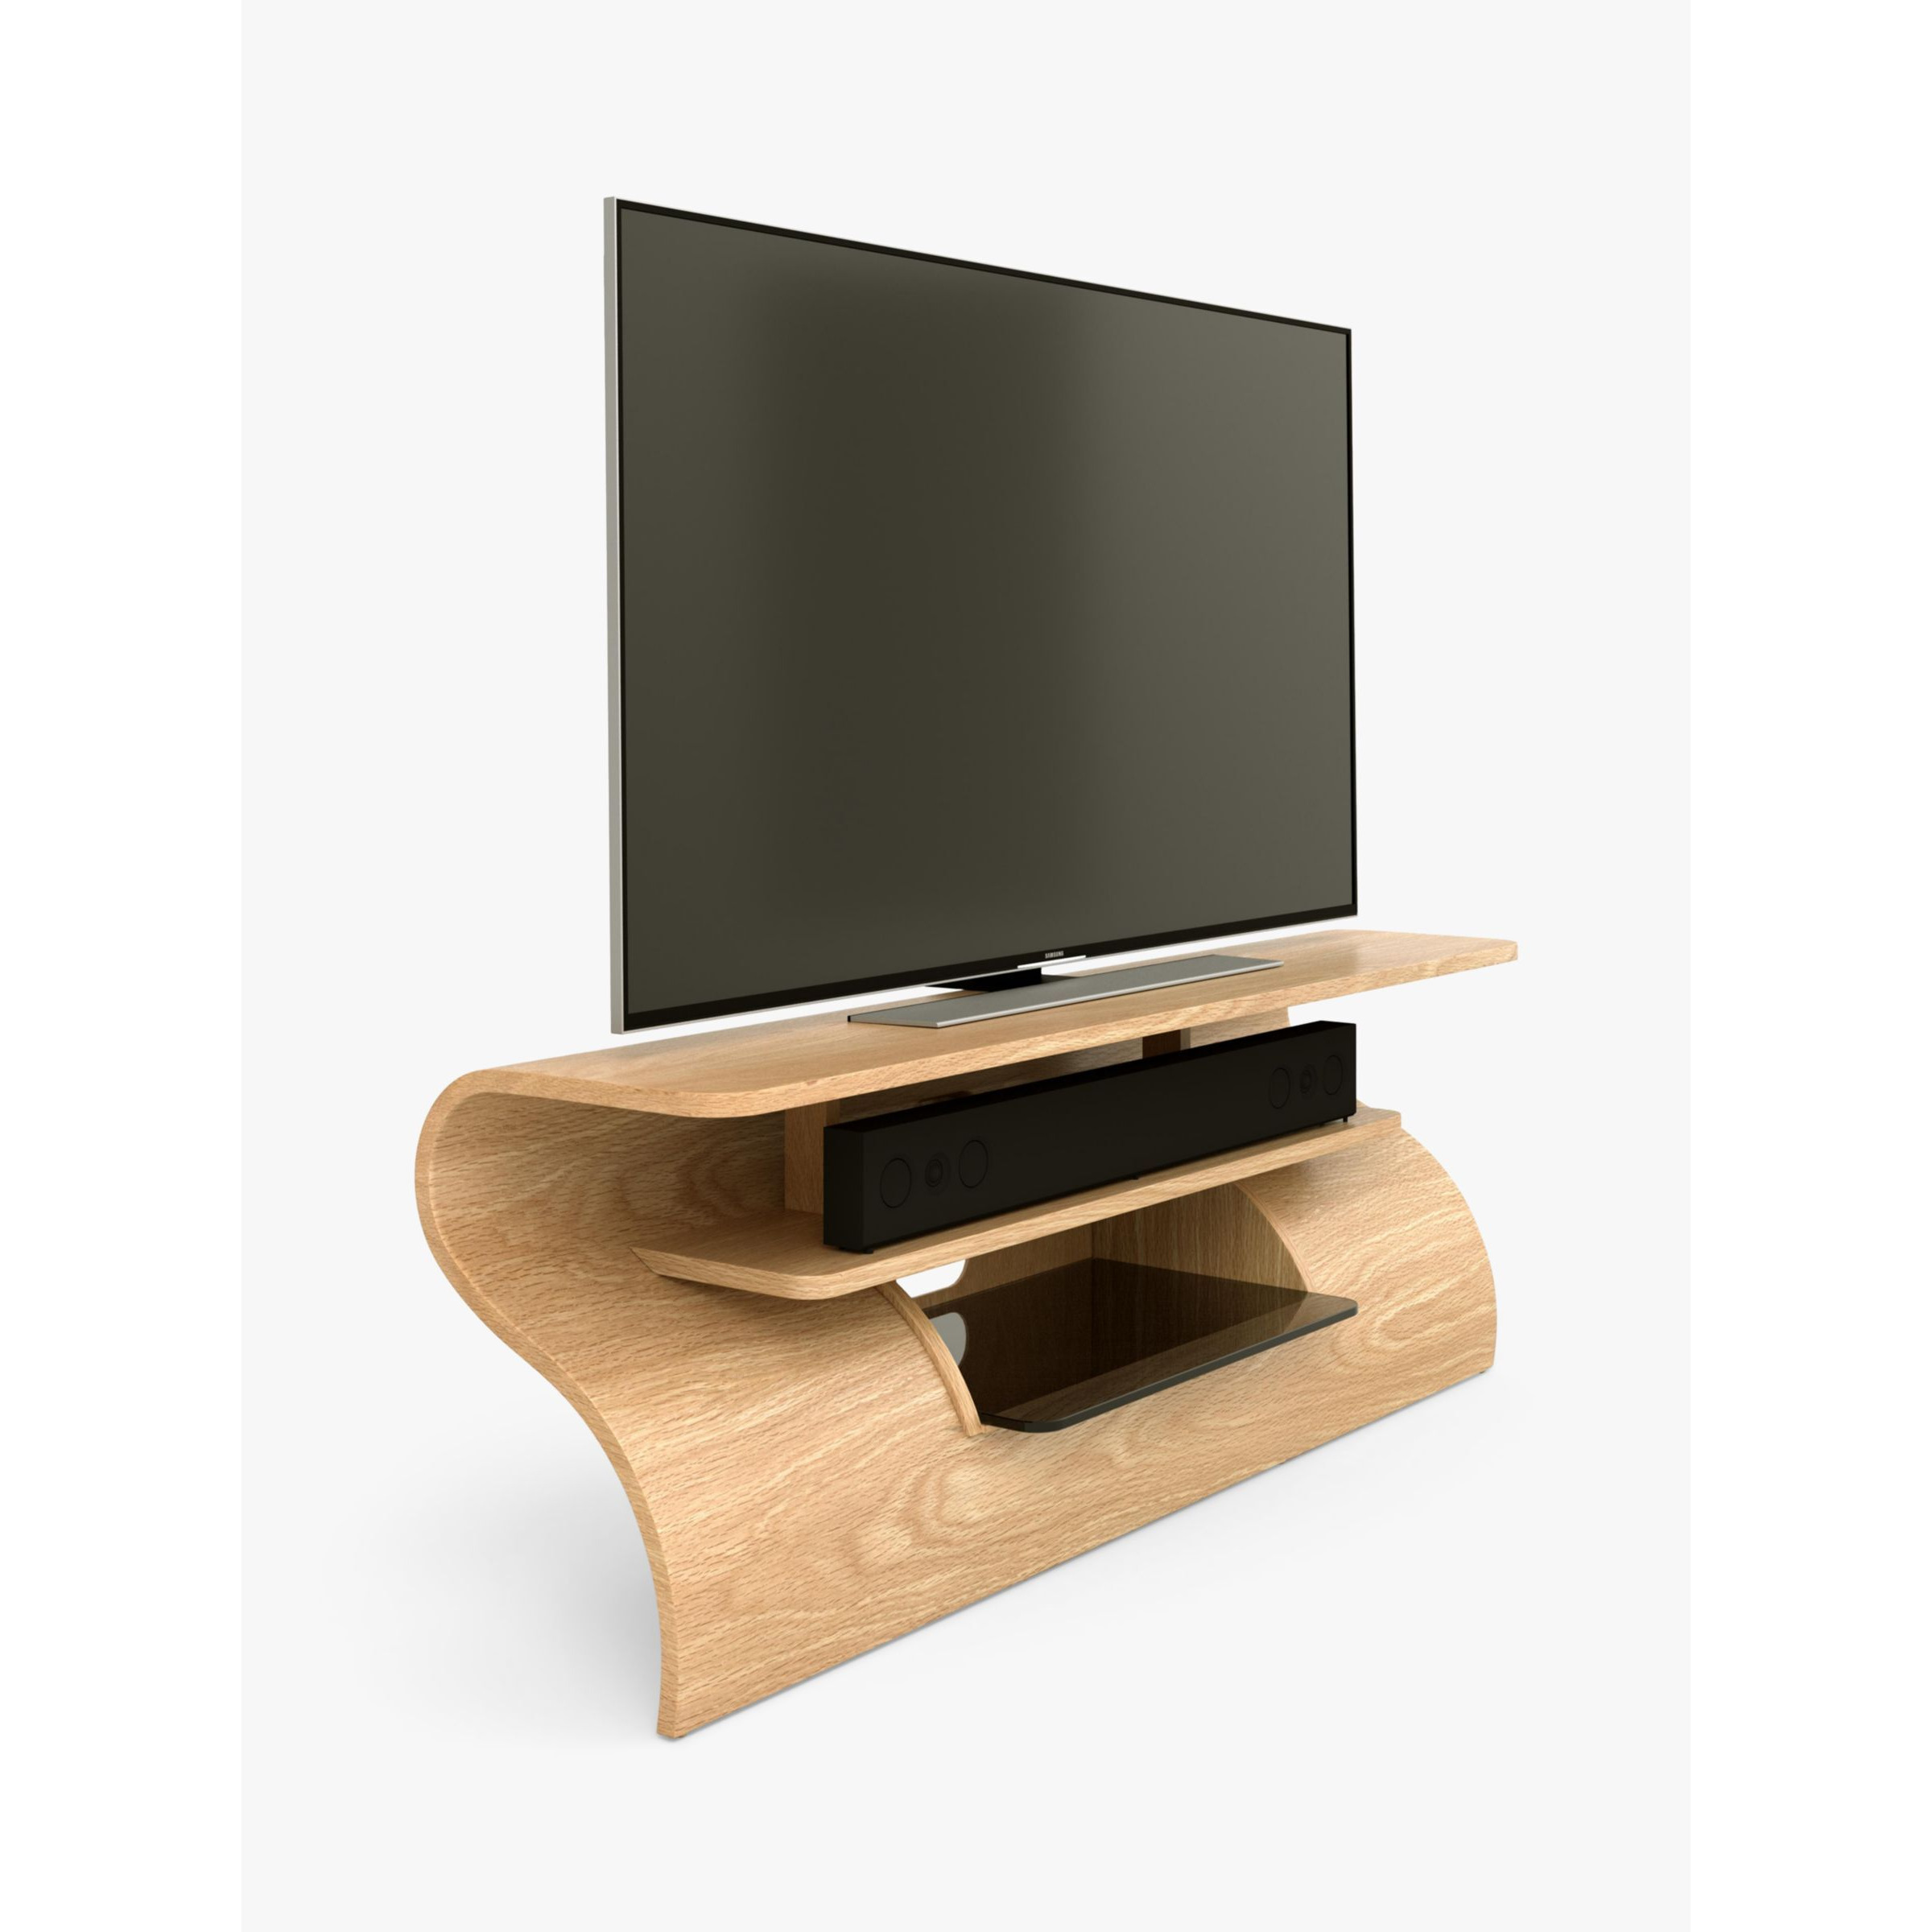 "Tom Schneider Surge 1350 TV Stand for TVs up to 60""" - image 1